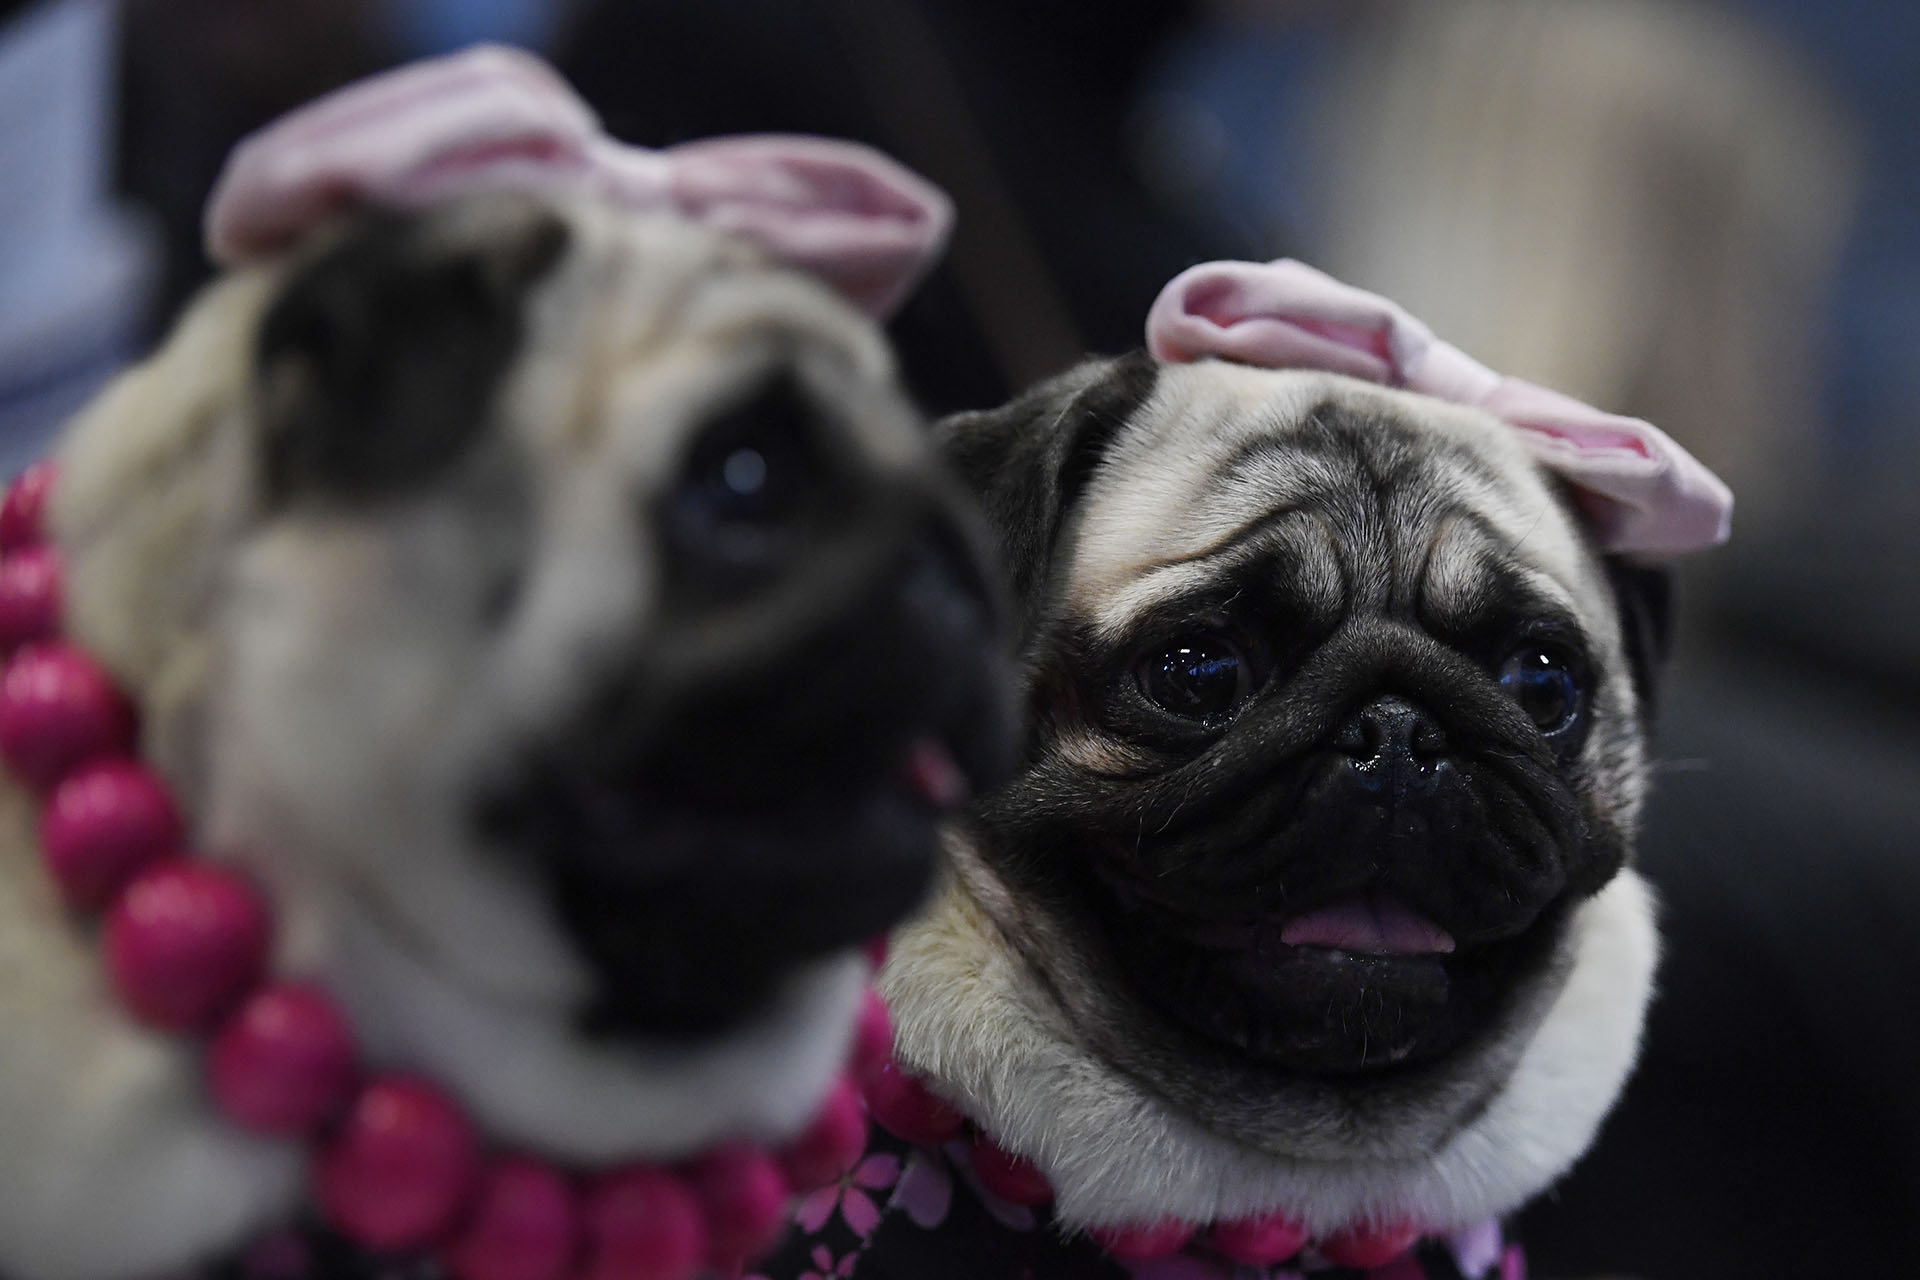 NEW YORK, NEW YORK - FEBRUARY 09: Pugs nicknamed 'The Pugdashians' attend the Meet The Breed event at Piers 92/94 ahead of the 143rd Westminster Kennel Club Dog Show on February 09, 2019 in New York City. Sarah Stier/Getty Images/AFP